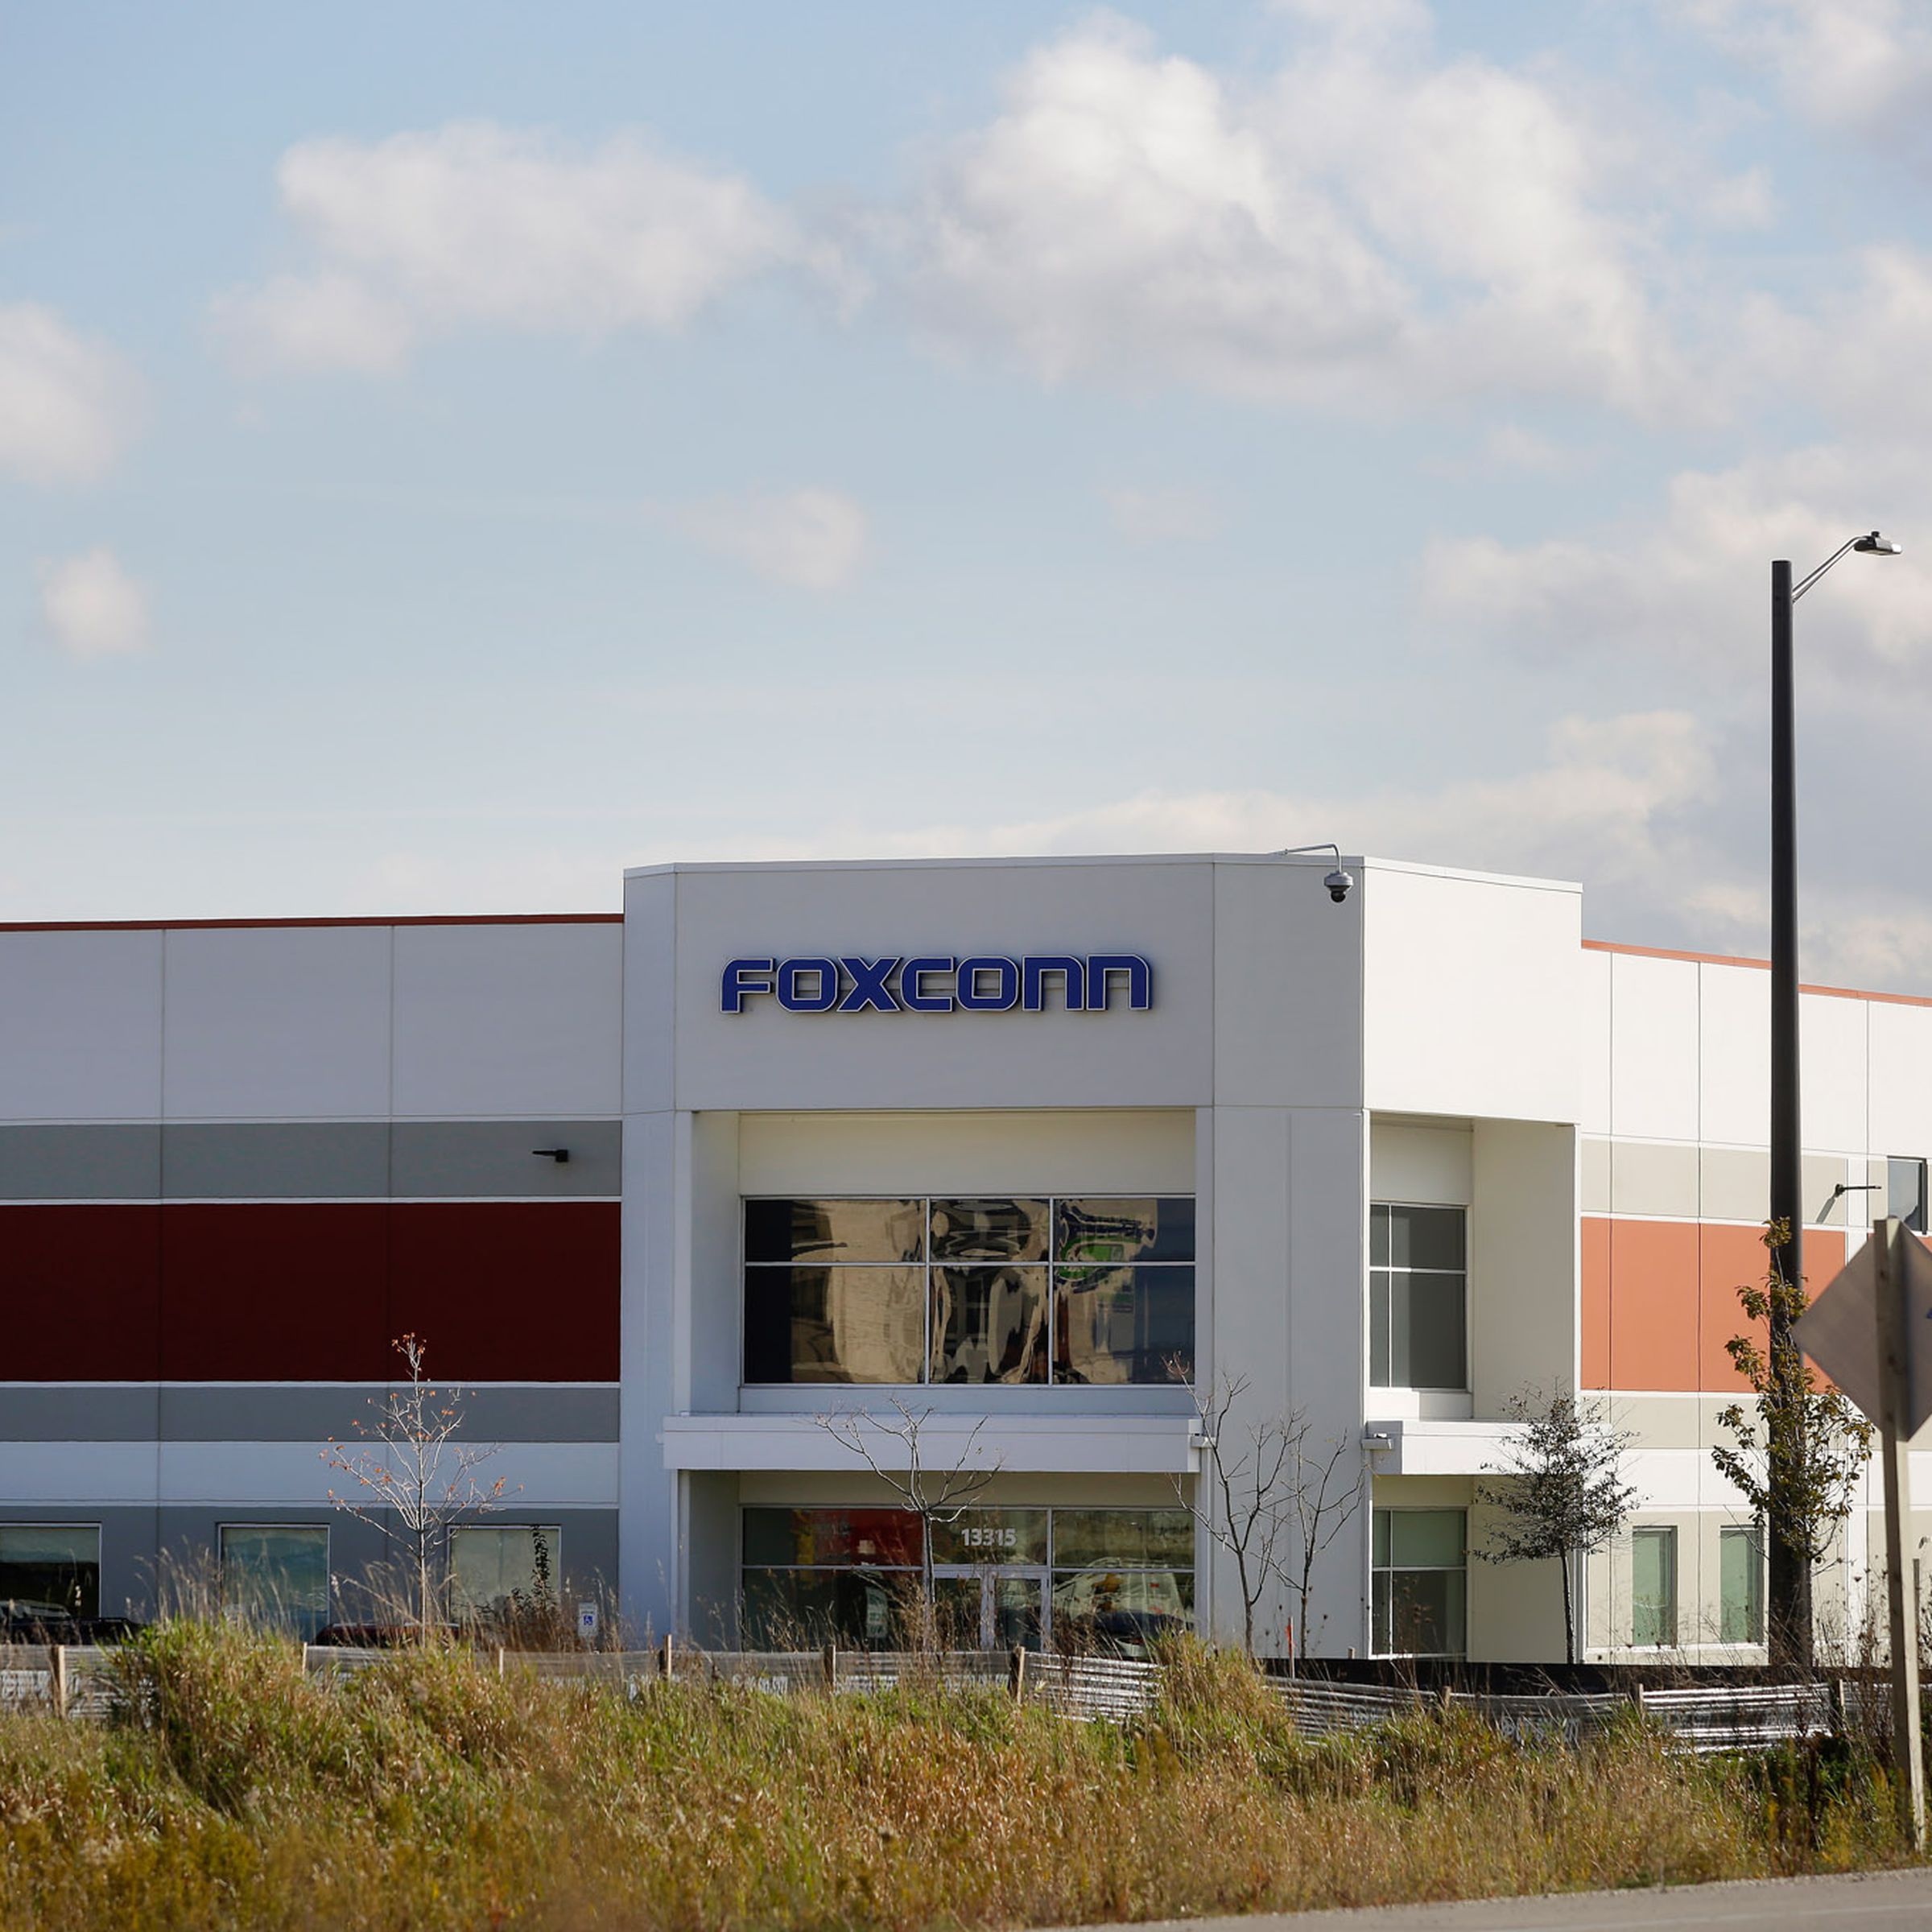 A Foxconn “innovation center” in Wisconsin